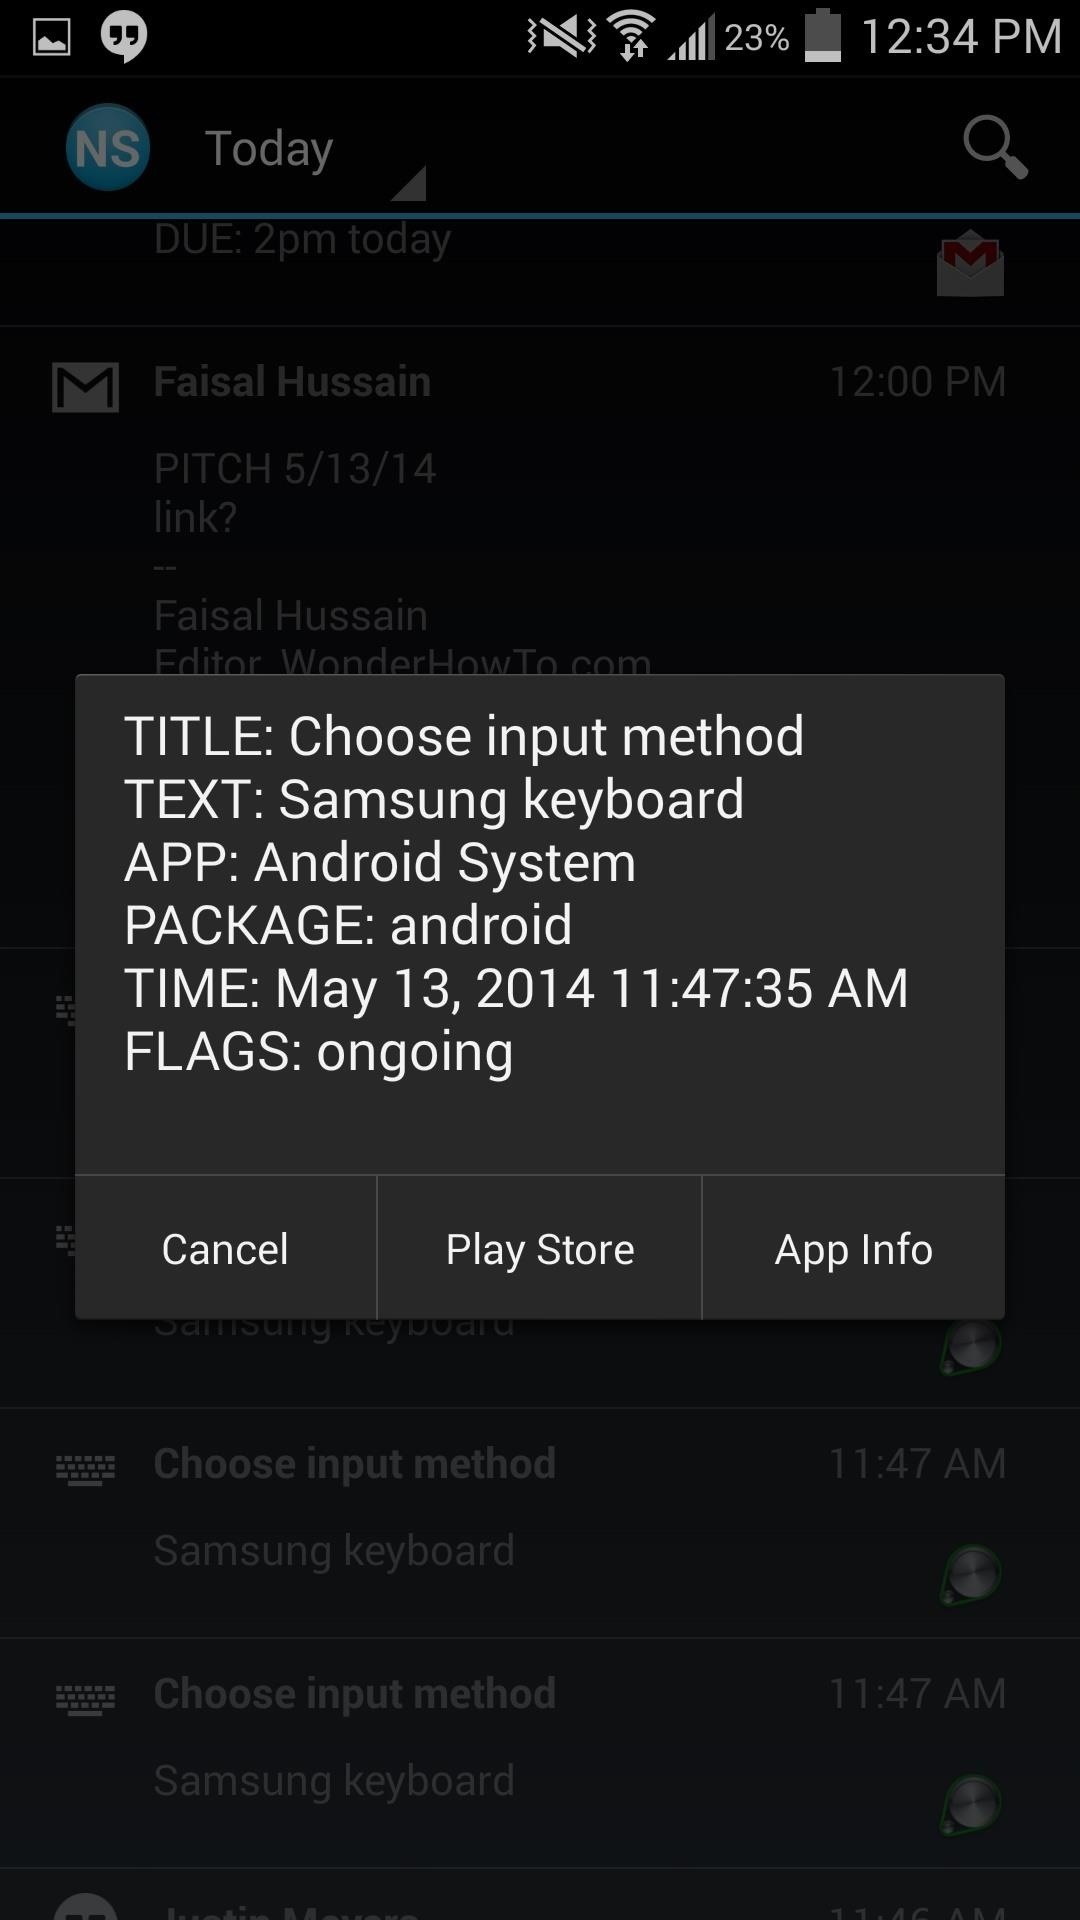 How to Save & Search Through Your Entire Notification History on the Samsung Galaxy S4